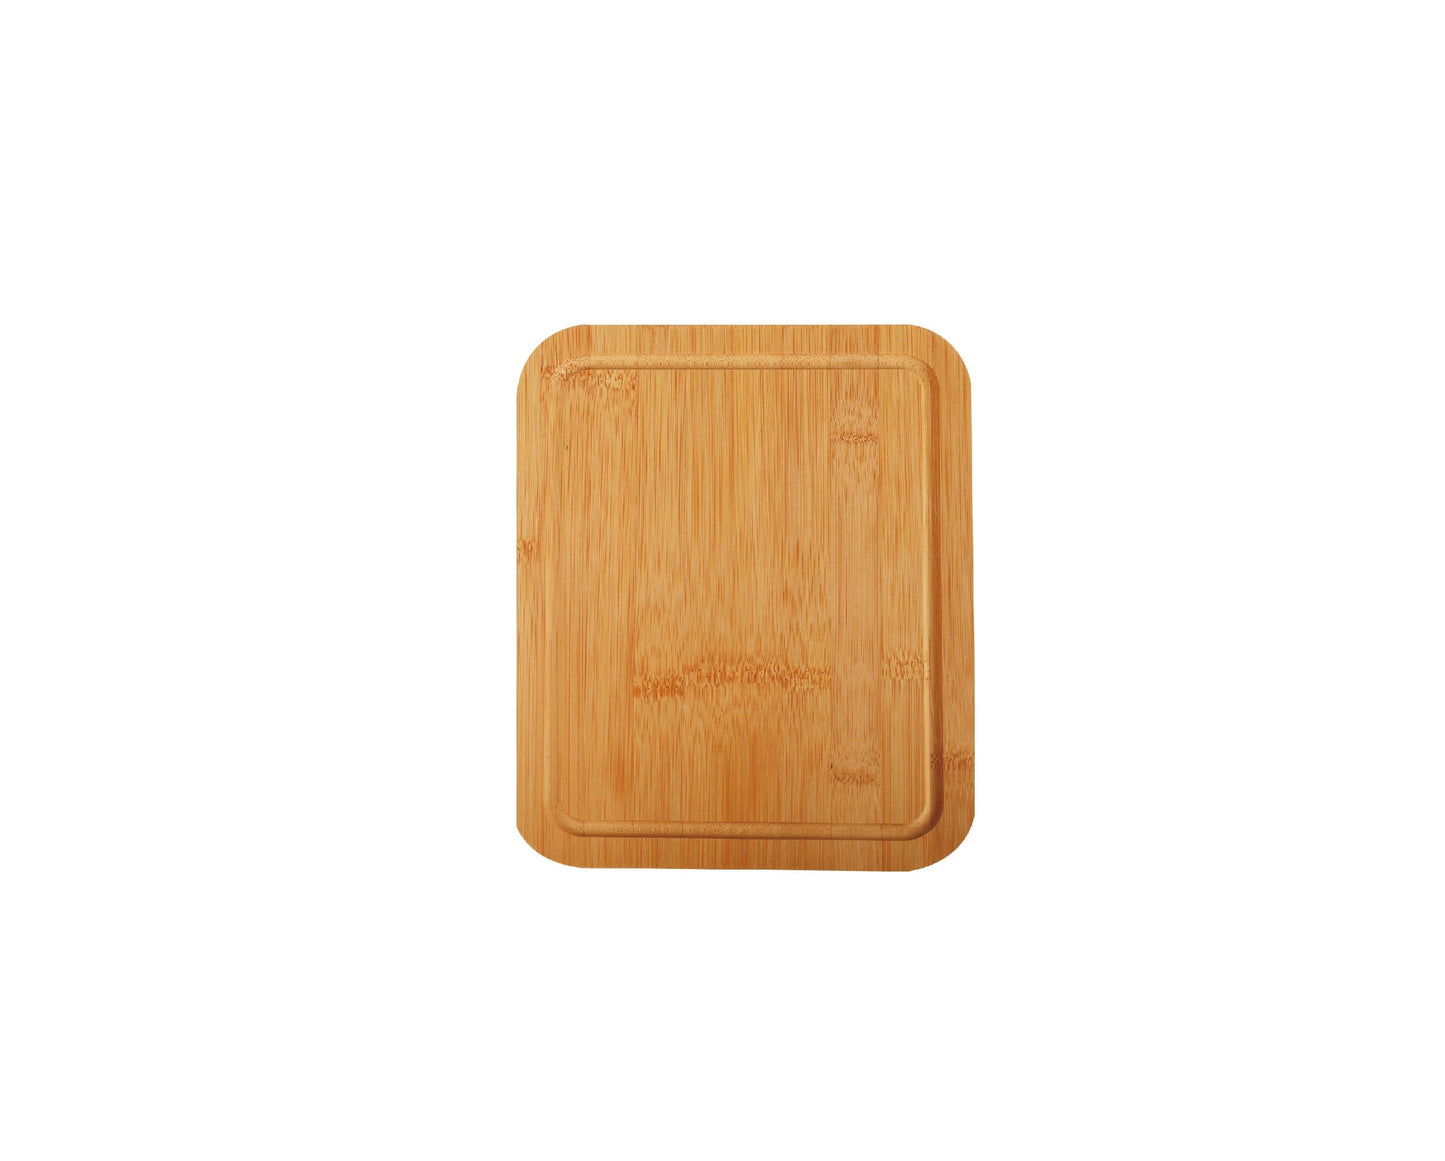 Fandcy BAMBOO SQUARE STEAK BOARD WITH COVER